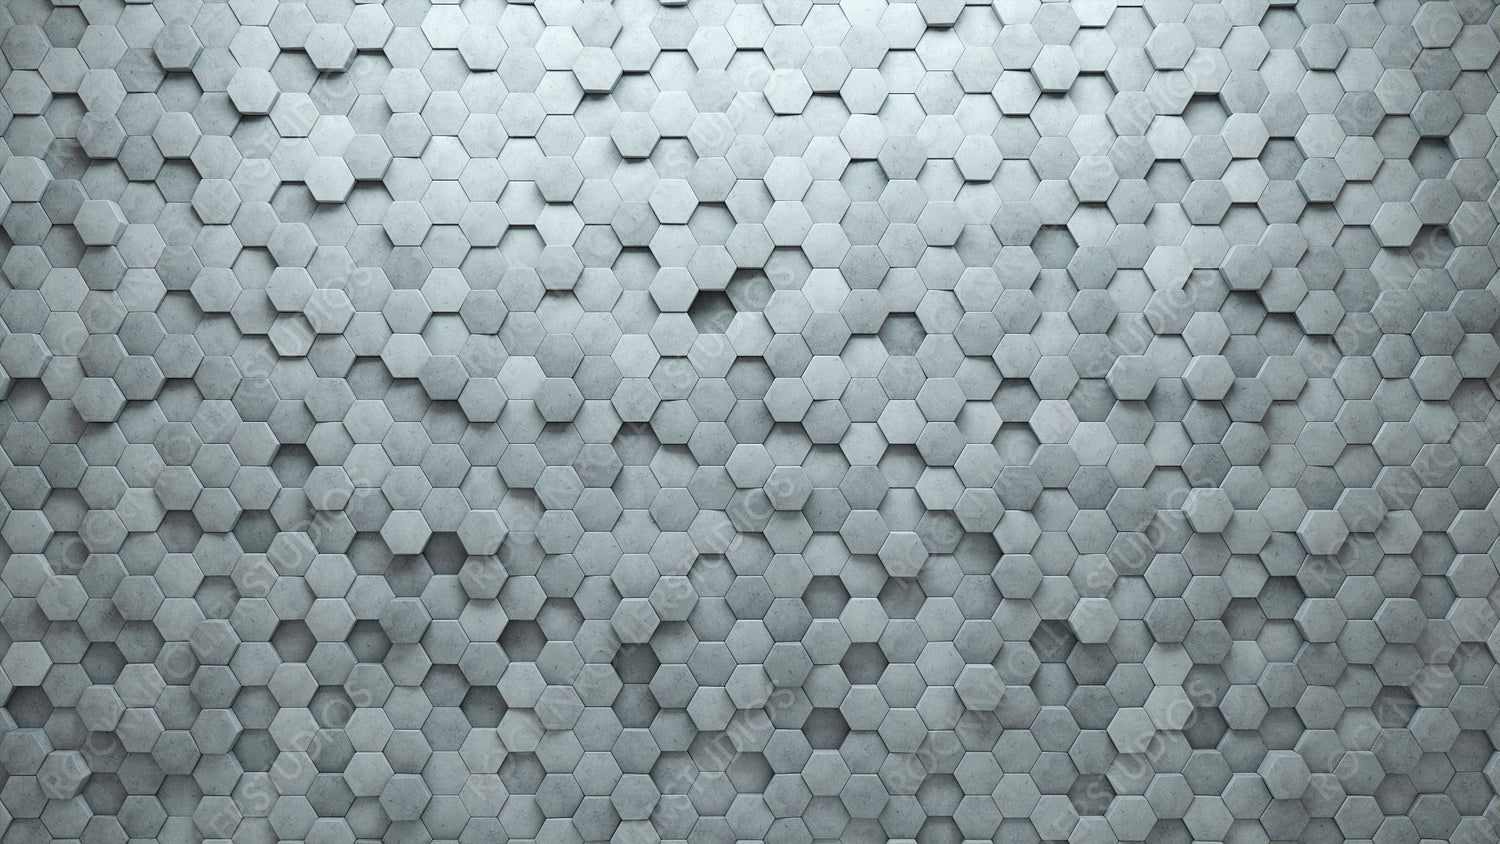 Futuristic Tiles arranged to create a Concrete wall. Hexagonal, Semigloss Background formed from 3D blocks. 3D Render